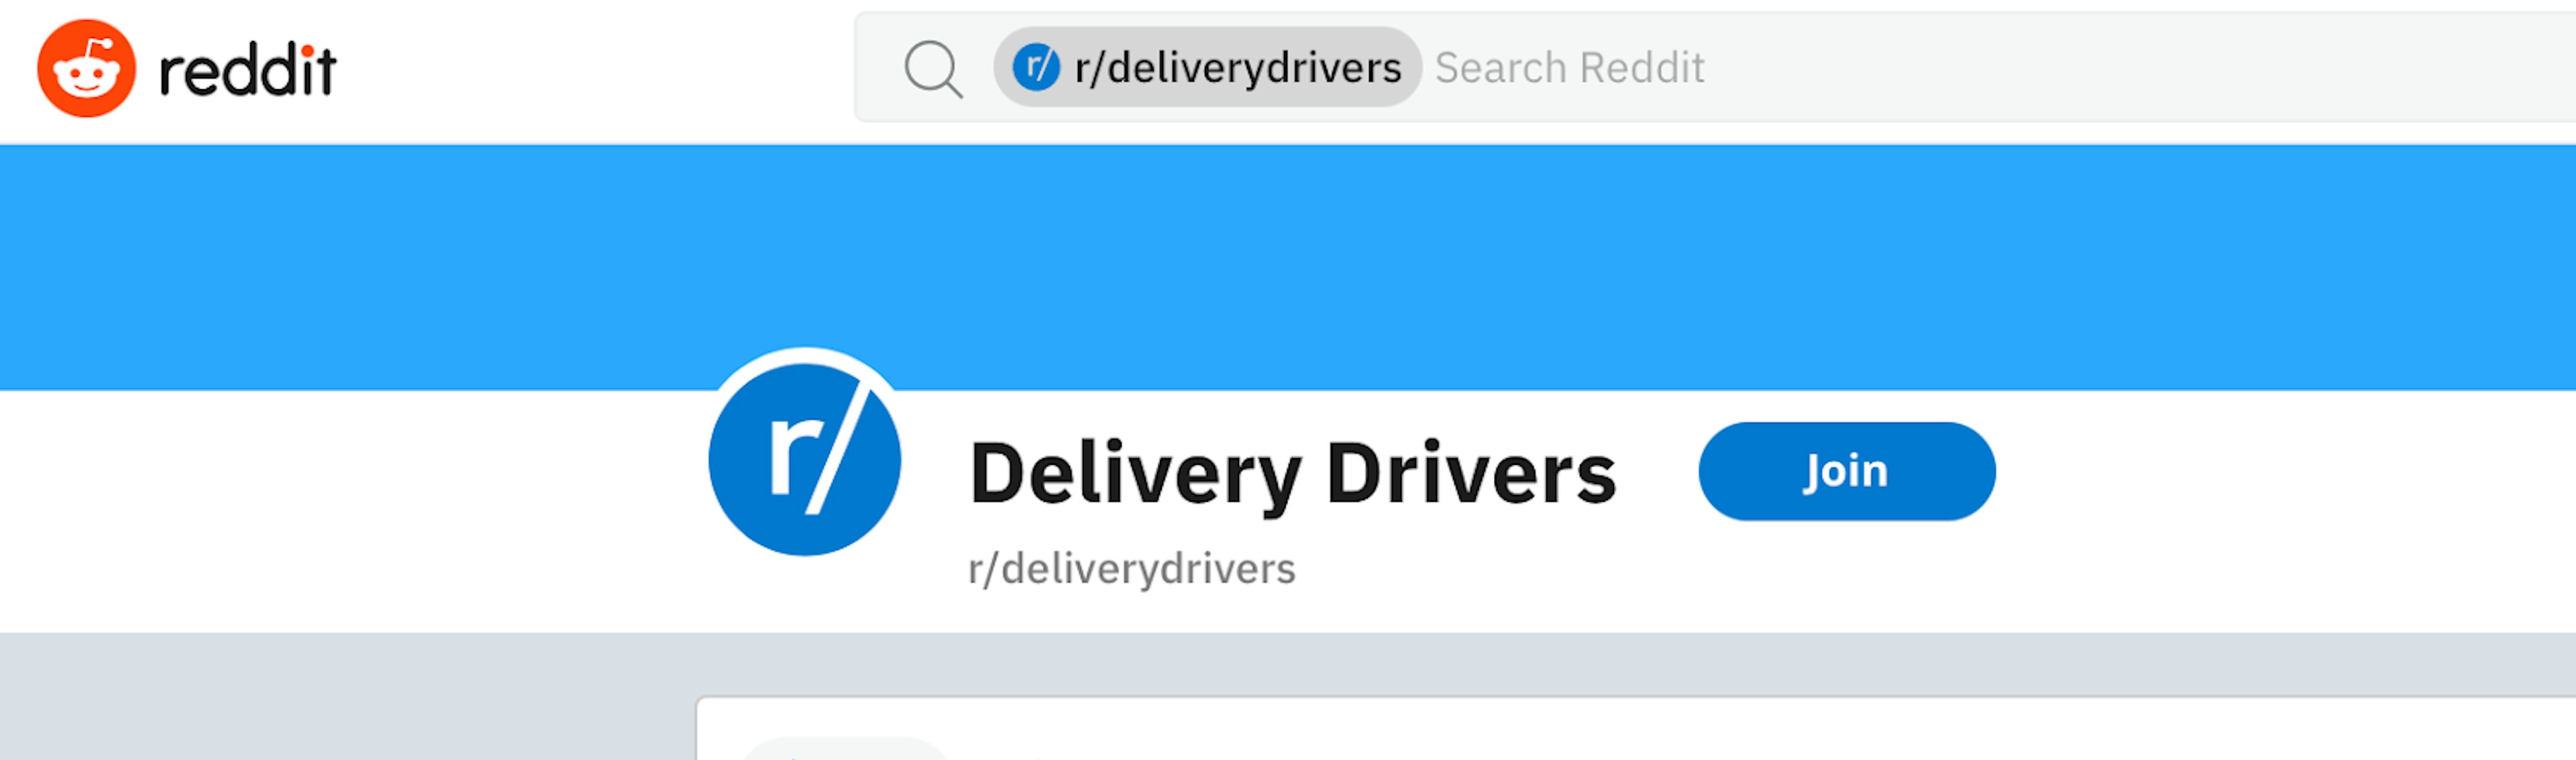 Reddit Delivery Drivers thread